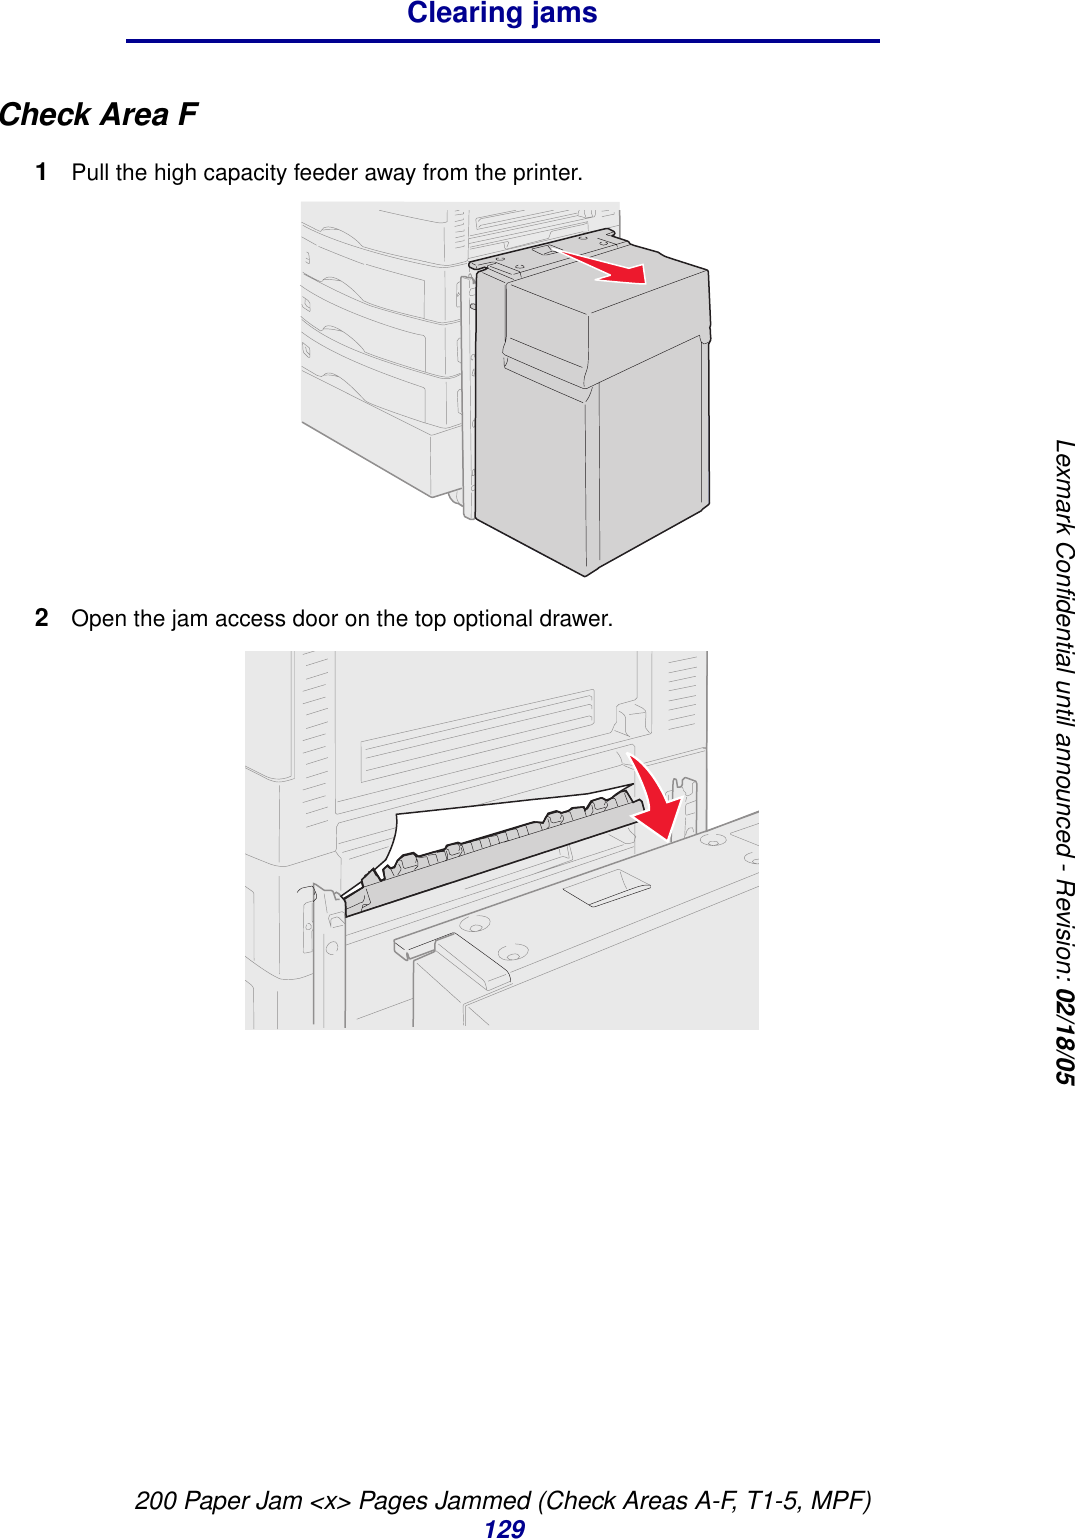 200 Paper Jam &lt;x&gt; Pages Jammed (Check Areas A-F, T1-5, MPF)129Clearing jamsLexmark Confidential until announced - Revision: 02/18/05CheckAreaF1Pull the high capacity feeder away from the printer.2Open the jam access door on the top optional drawer.